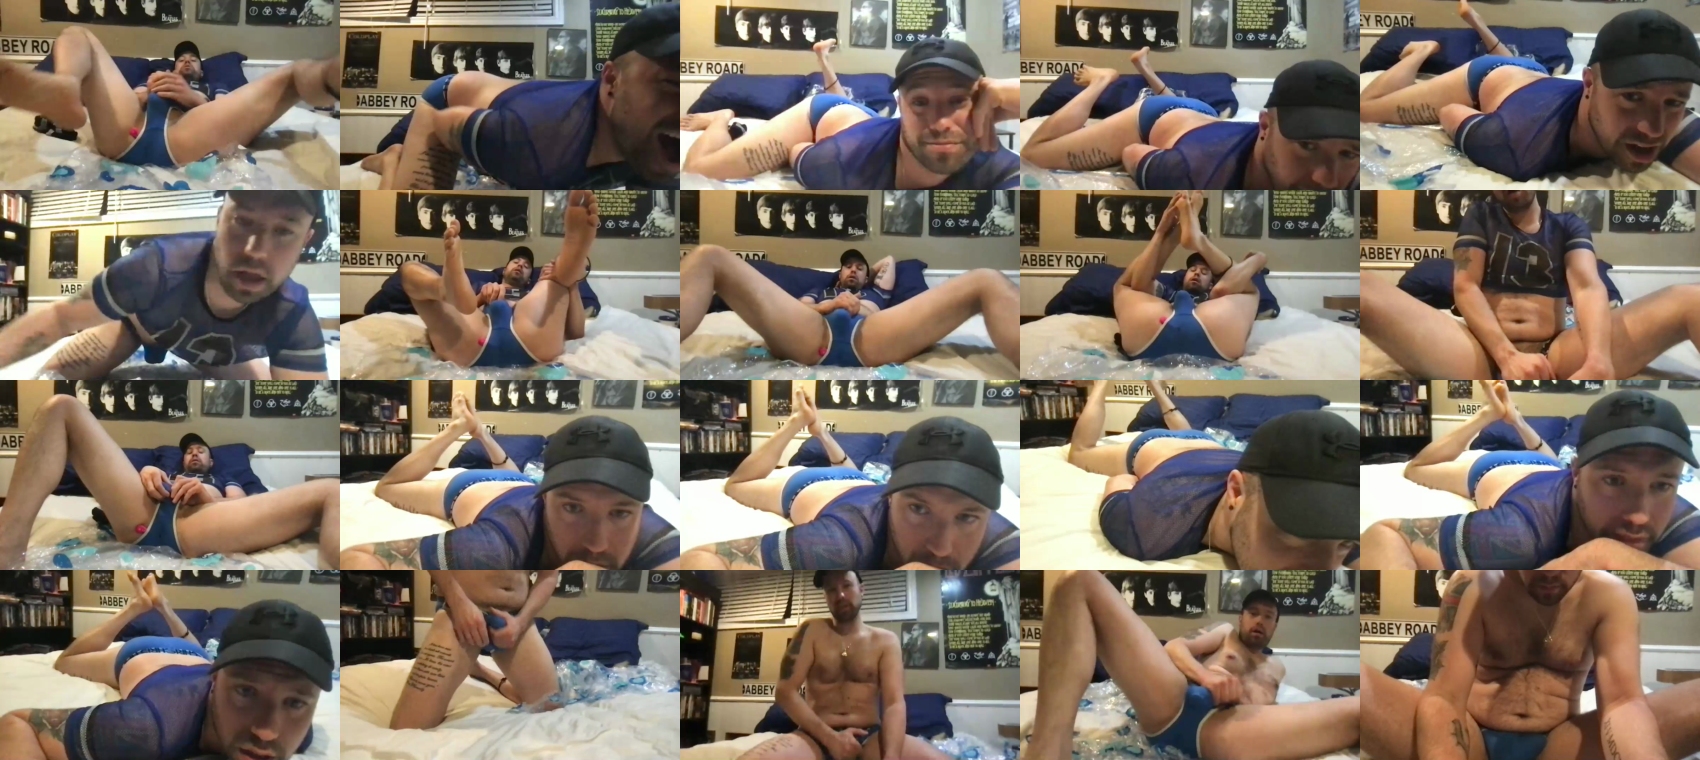 lucasm852  02-02-2022 Males analsex